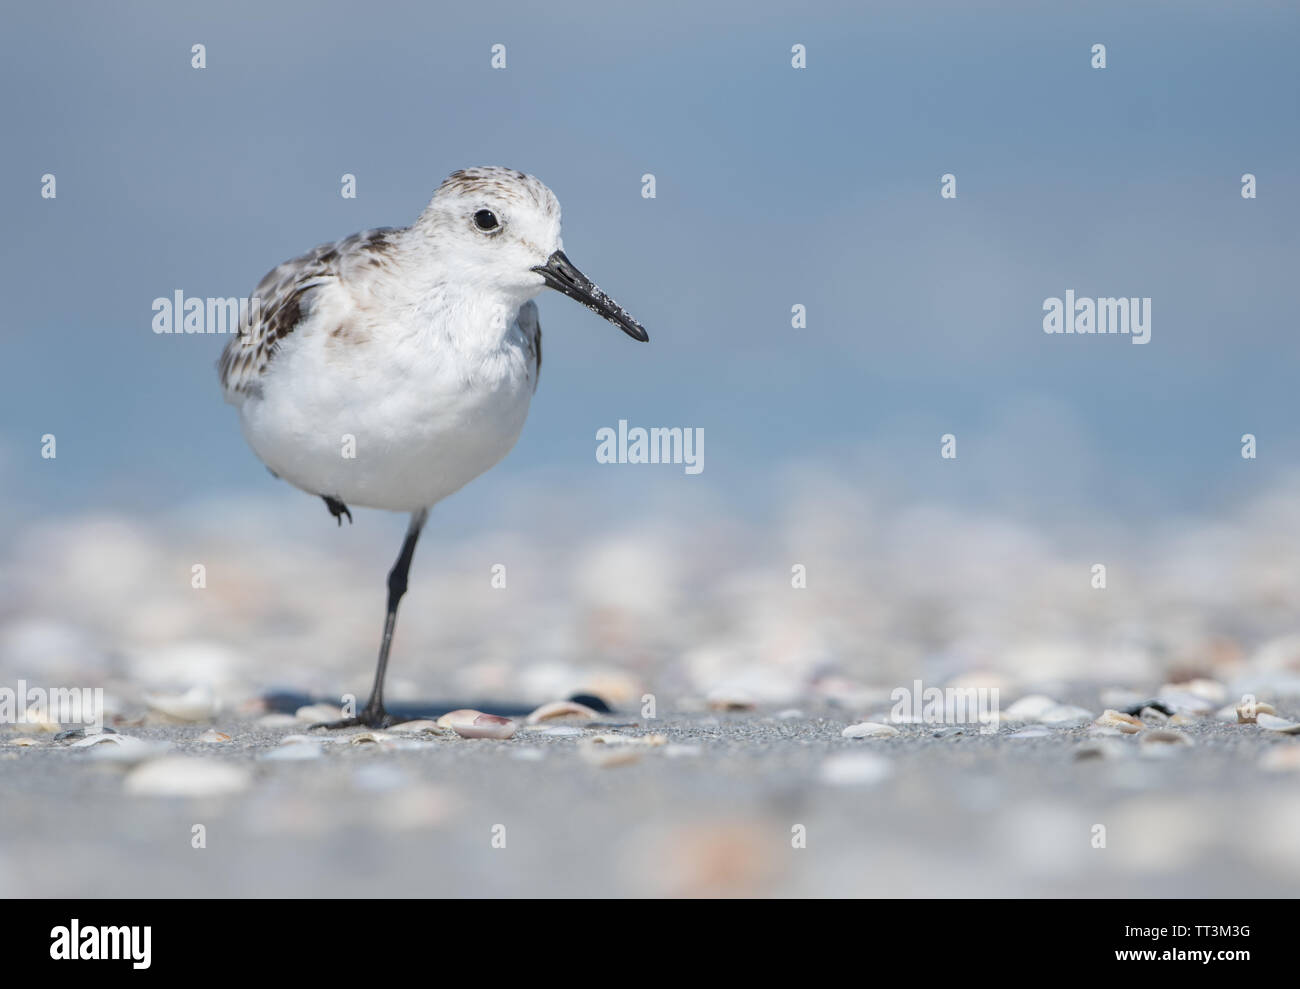 A Sanderling (Calidris Alba) stood on one leg on a white sandy beach covered in shells in Florida, USA, in sunlight. Stock Photo